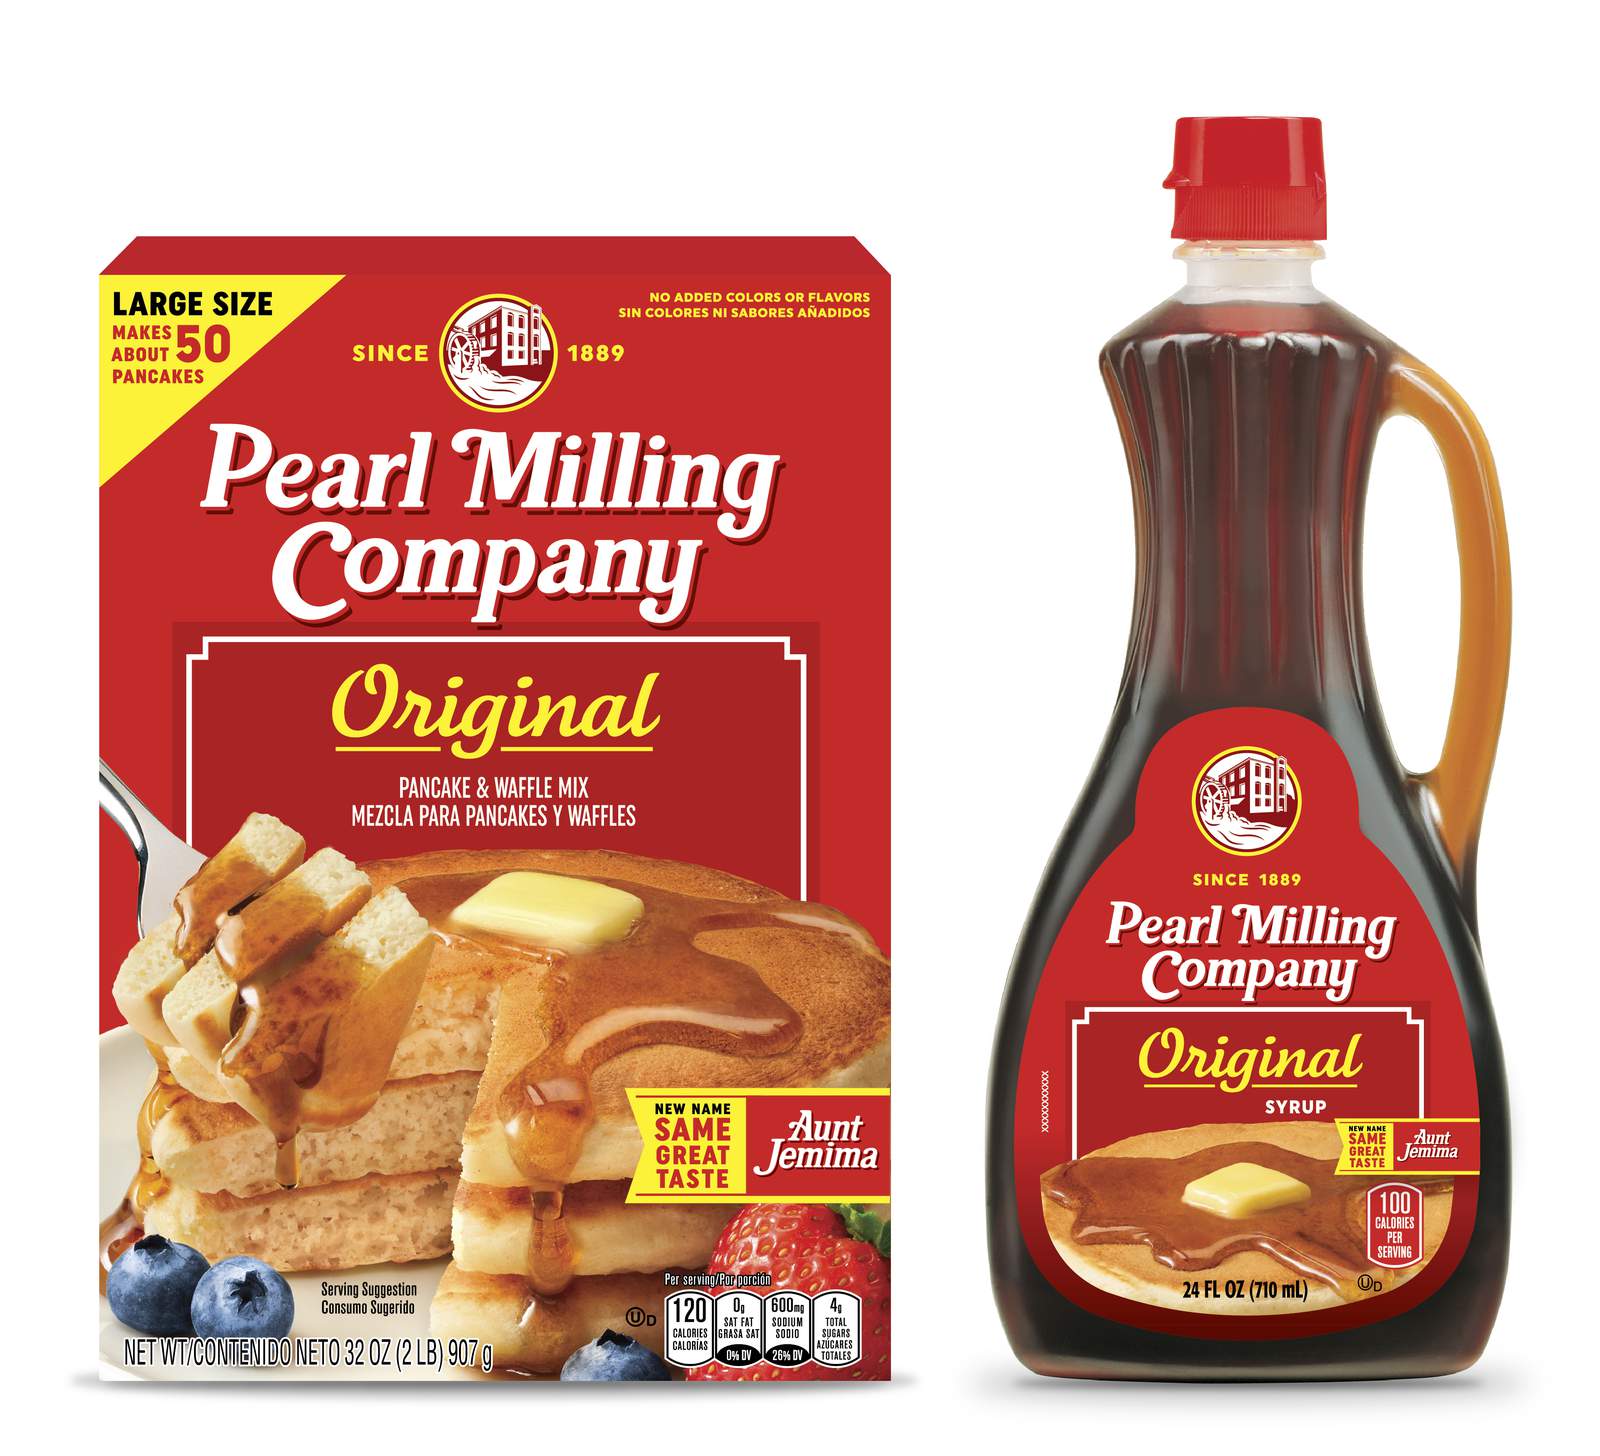 Aunt Jemima brand gets a new name: Pearl Milling Company